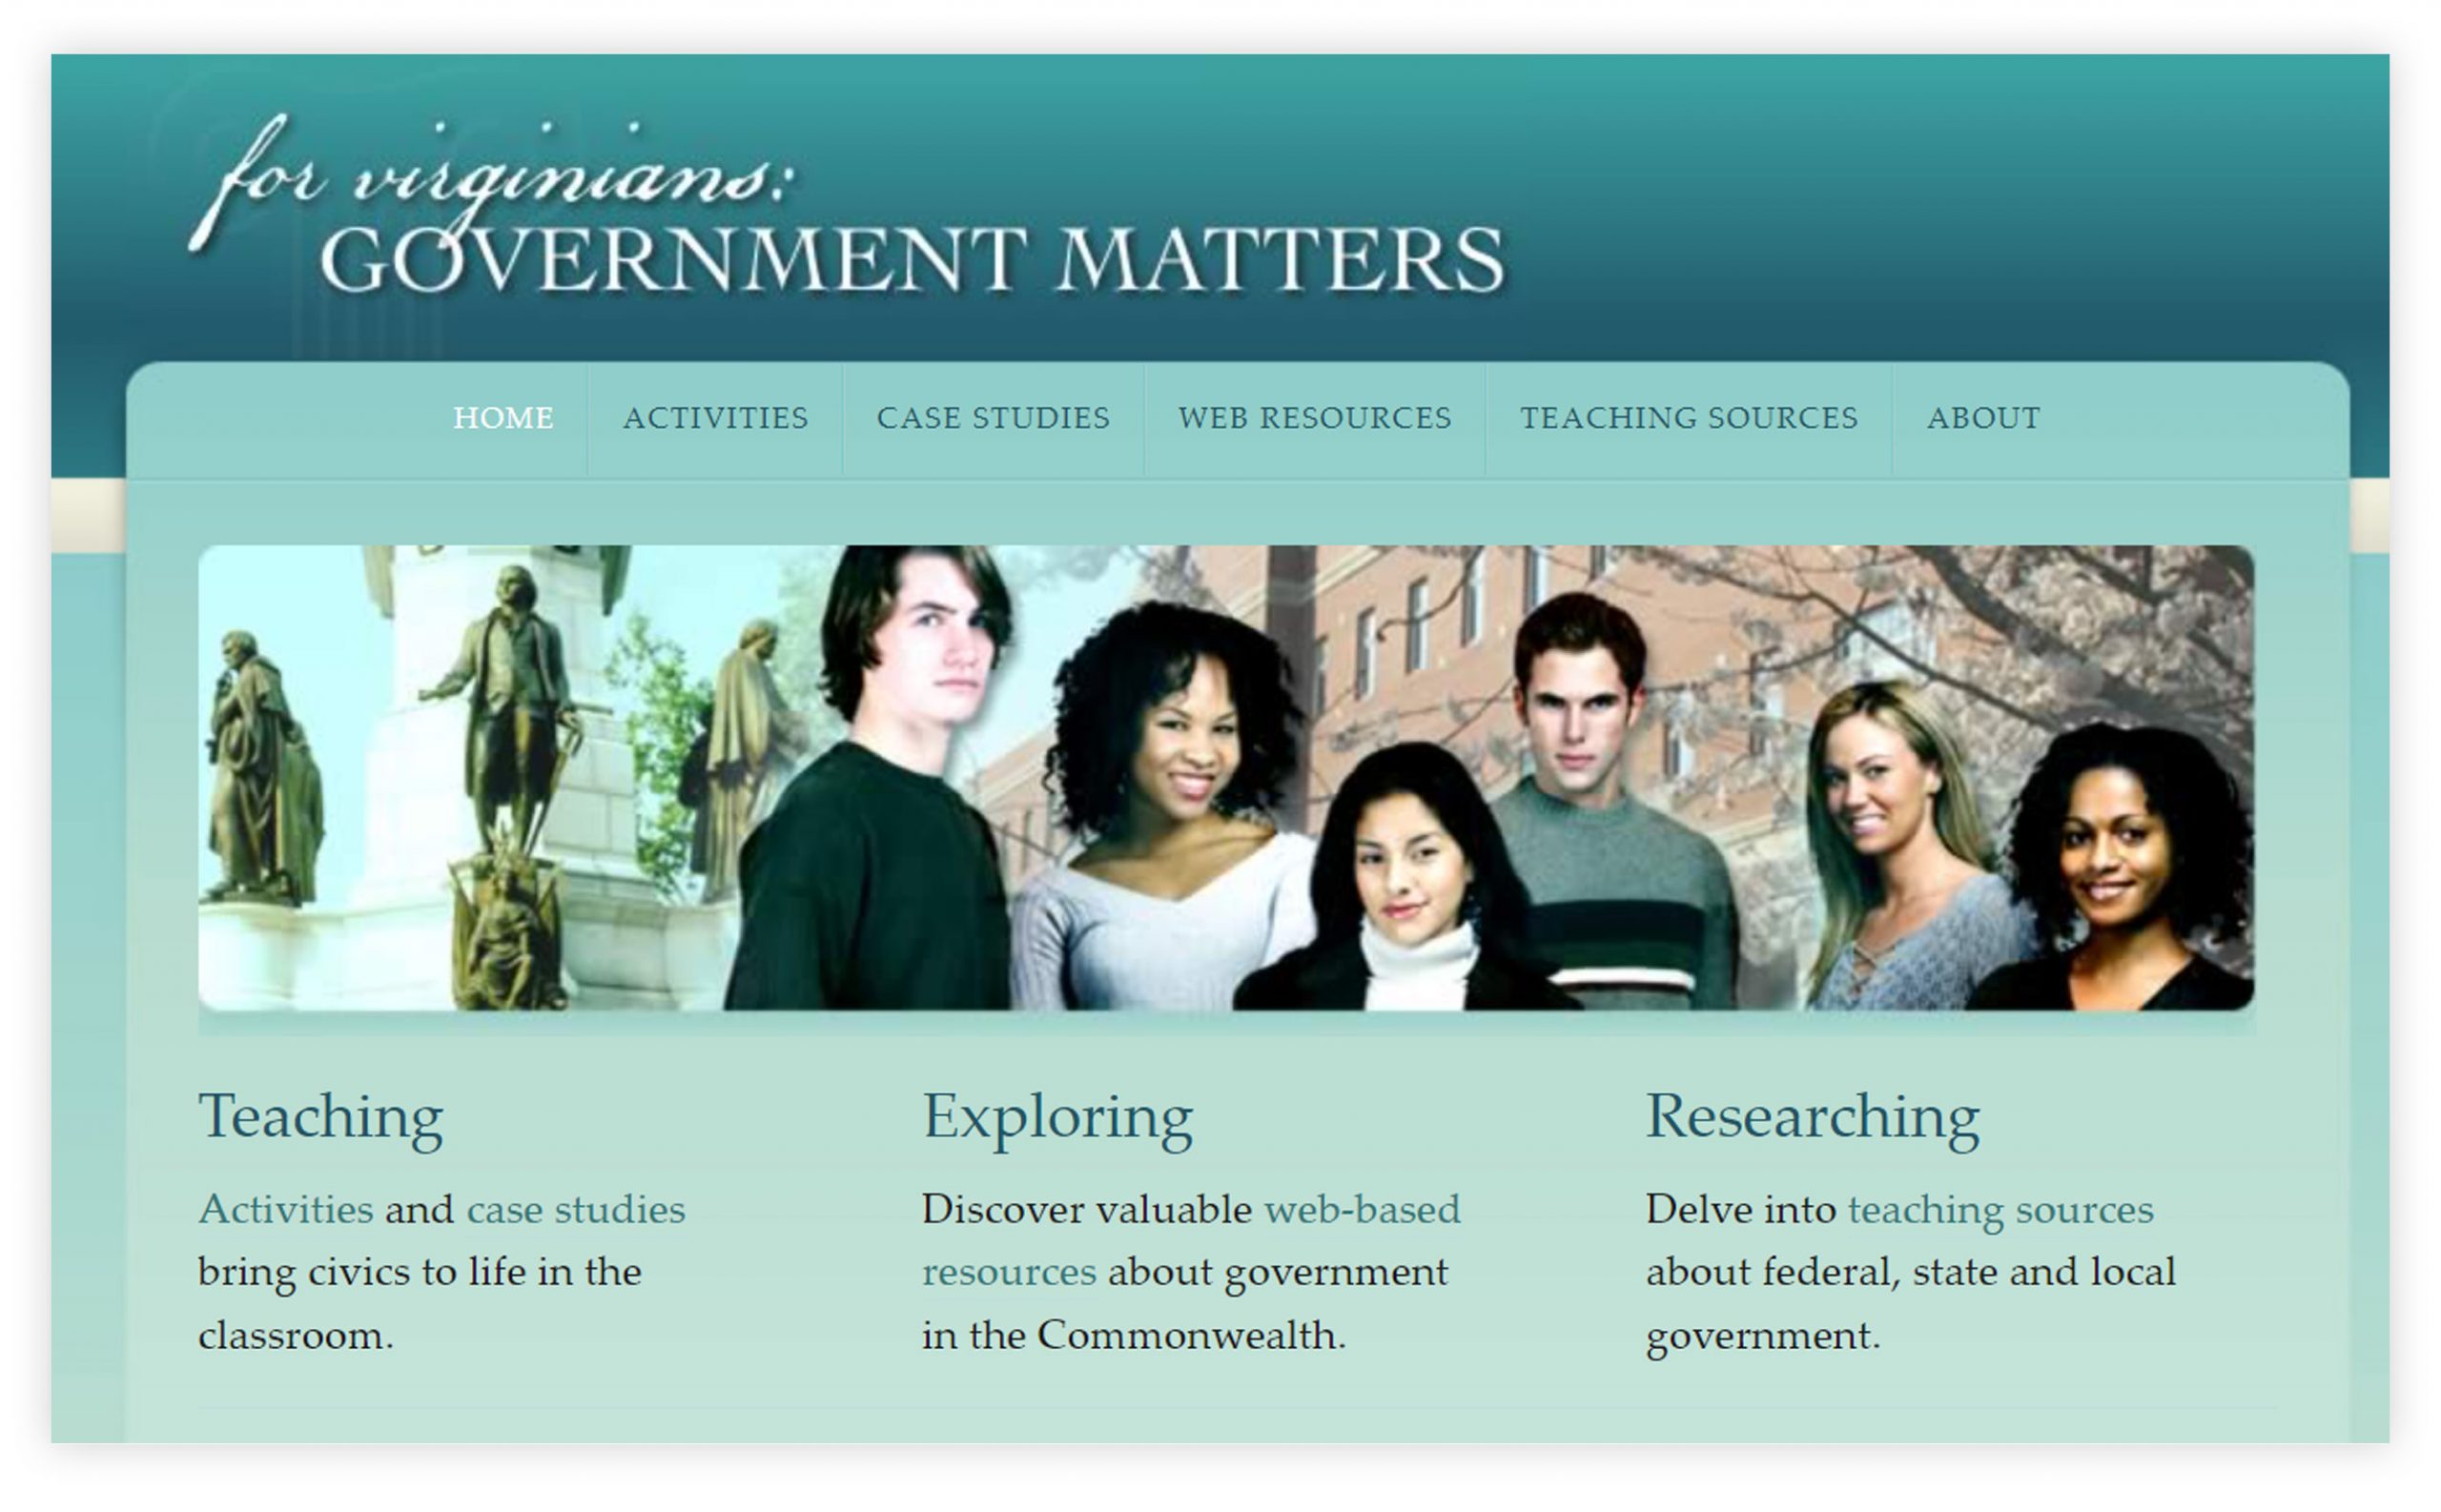 Screengrab of the For Virginians: Government Matters website home page.